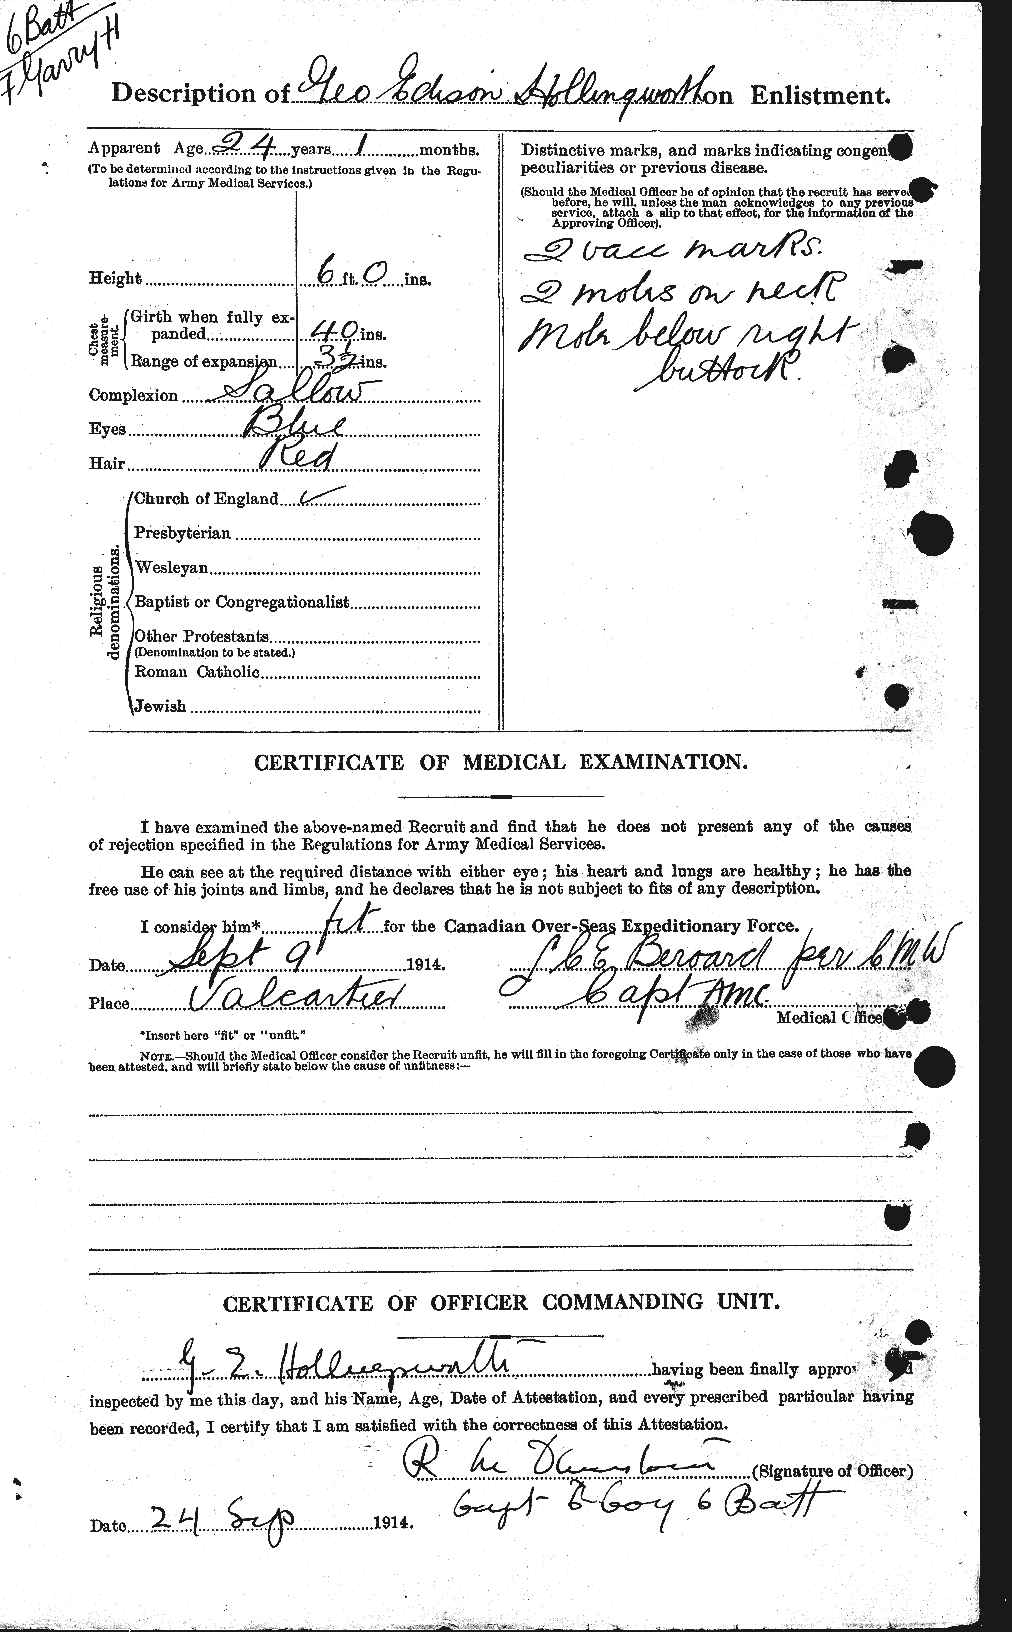 Personnel Records of the First World War - CEF 398216b